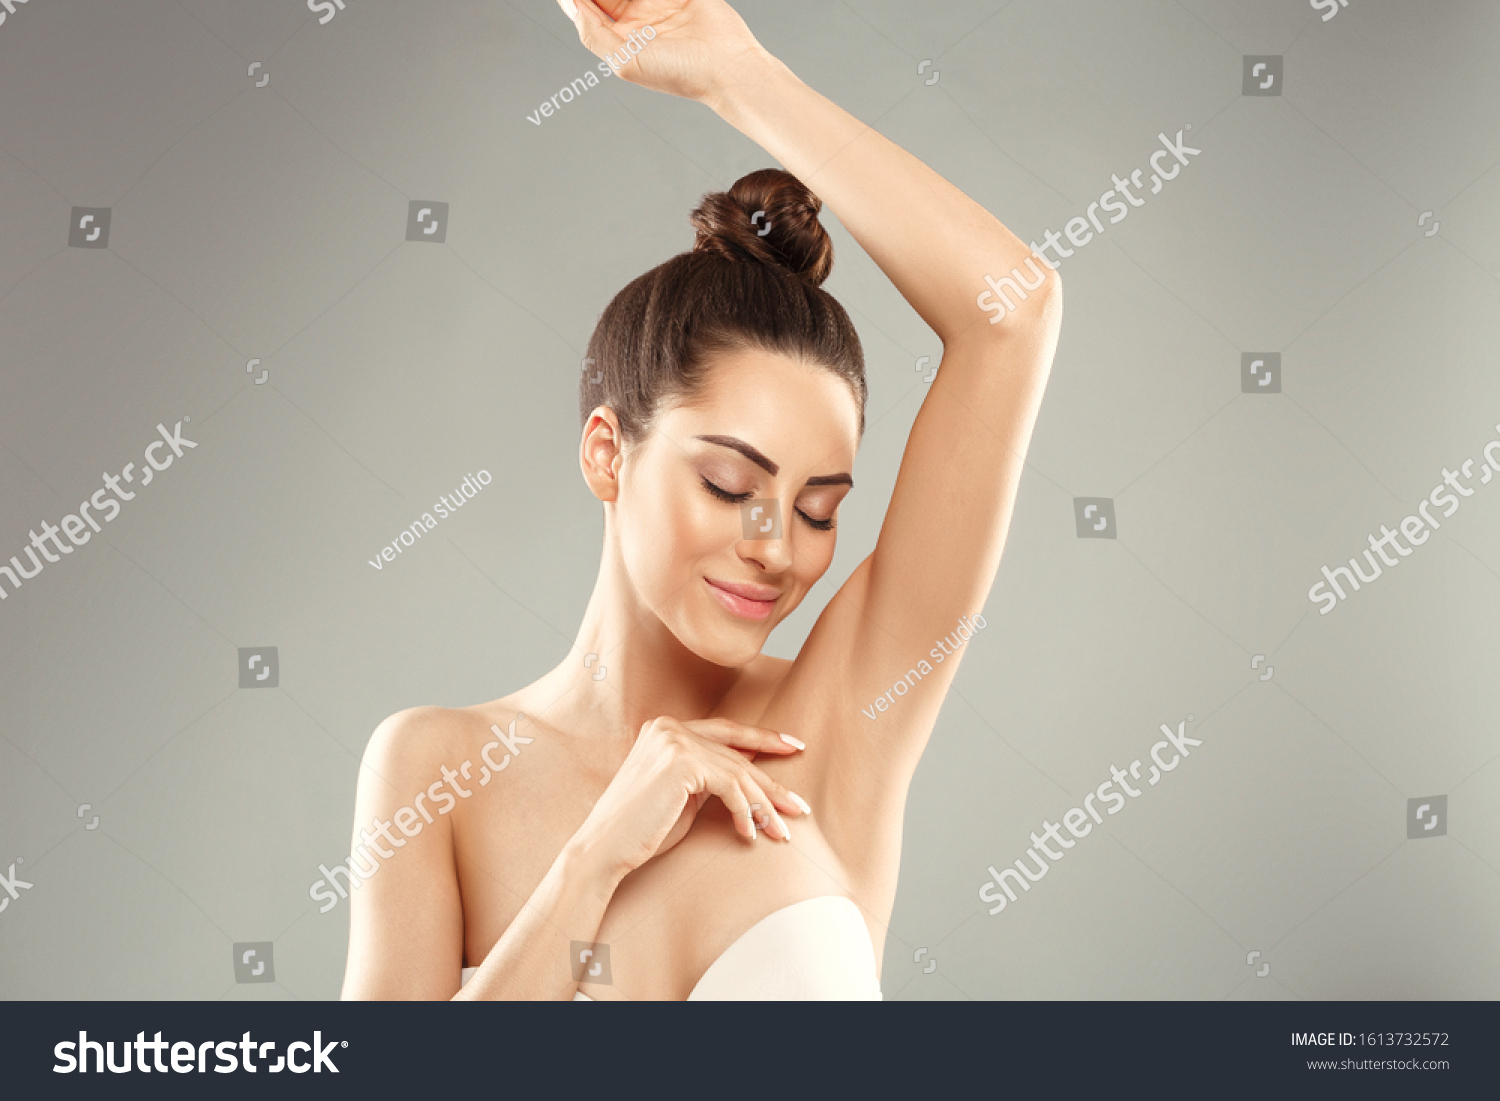 Armpit epilation, lacer hair removal. Young woman holding her arms up and showing clean underarms, depilation  smooth clear skin .Beauty portrait. #1613732572